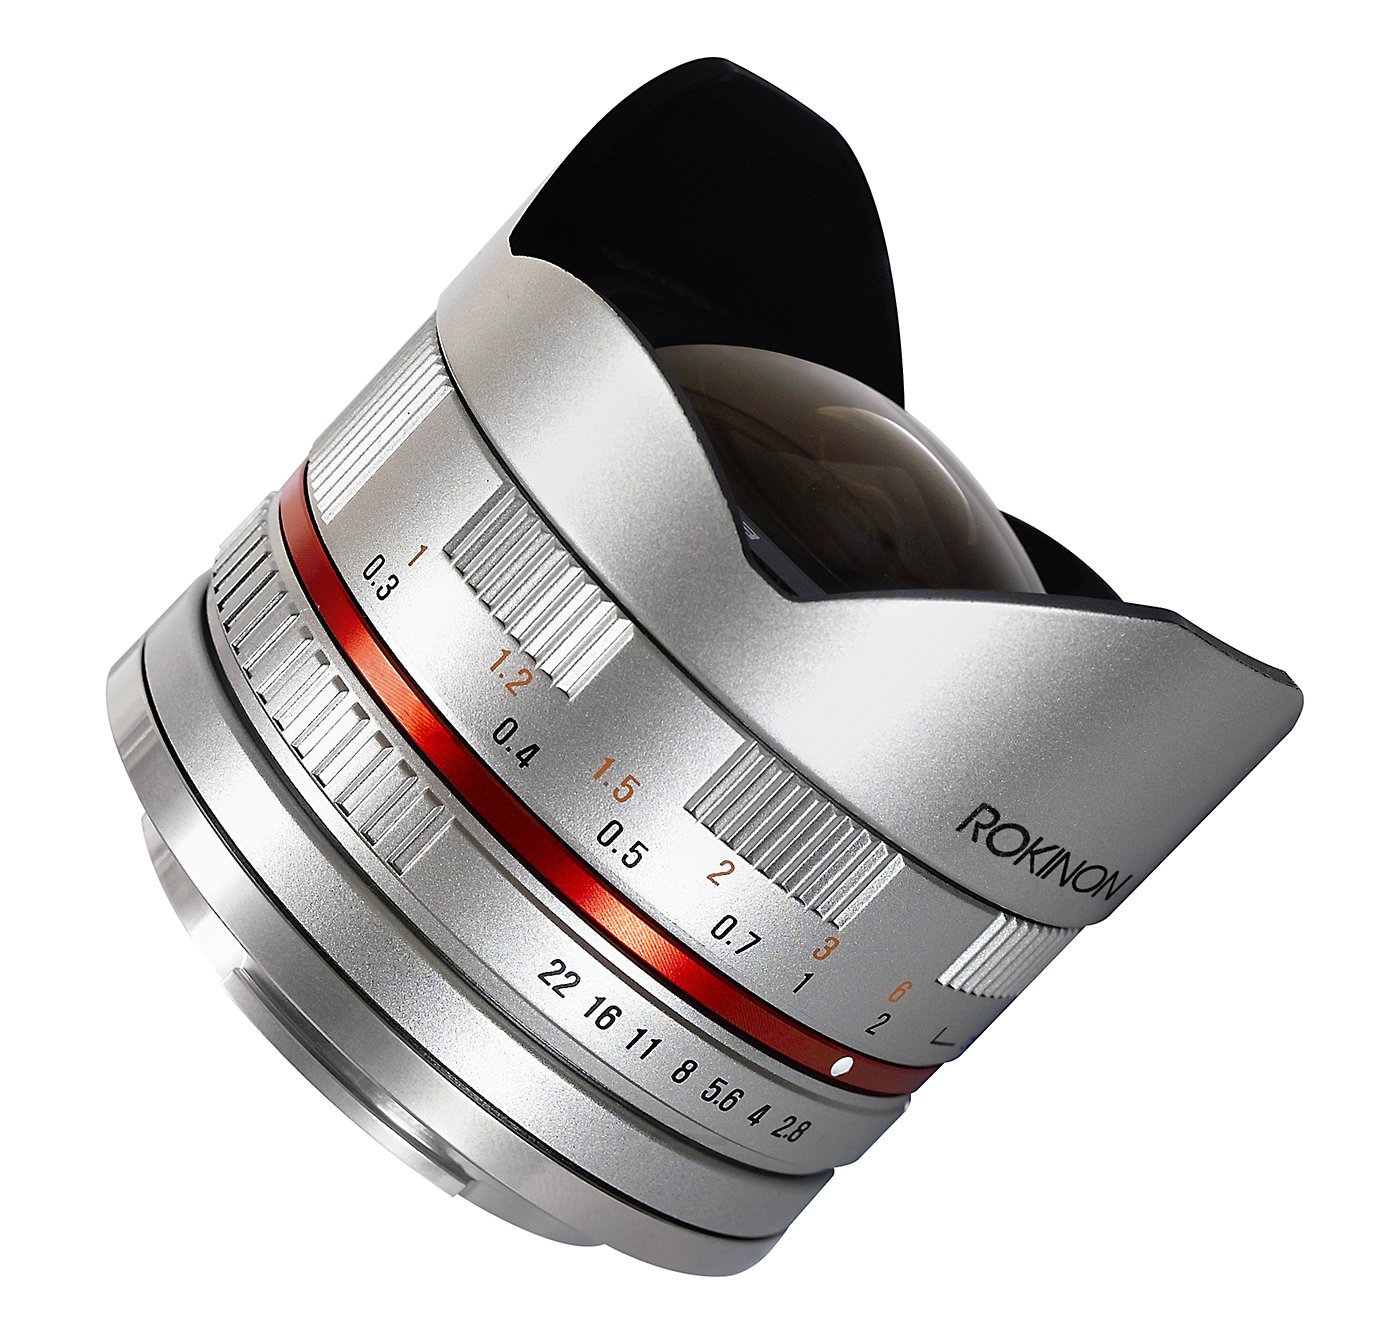 Rokinon 8mm F2.8 UMC Ultra Wide-Angle Fisheye Lens for Sony E-Mount, Silver - image 1 of 2